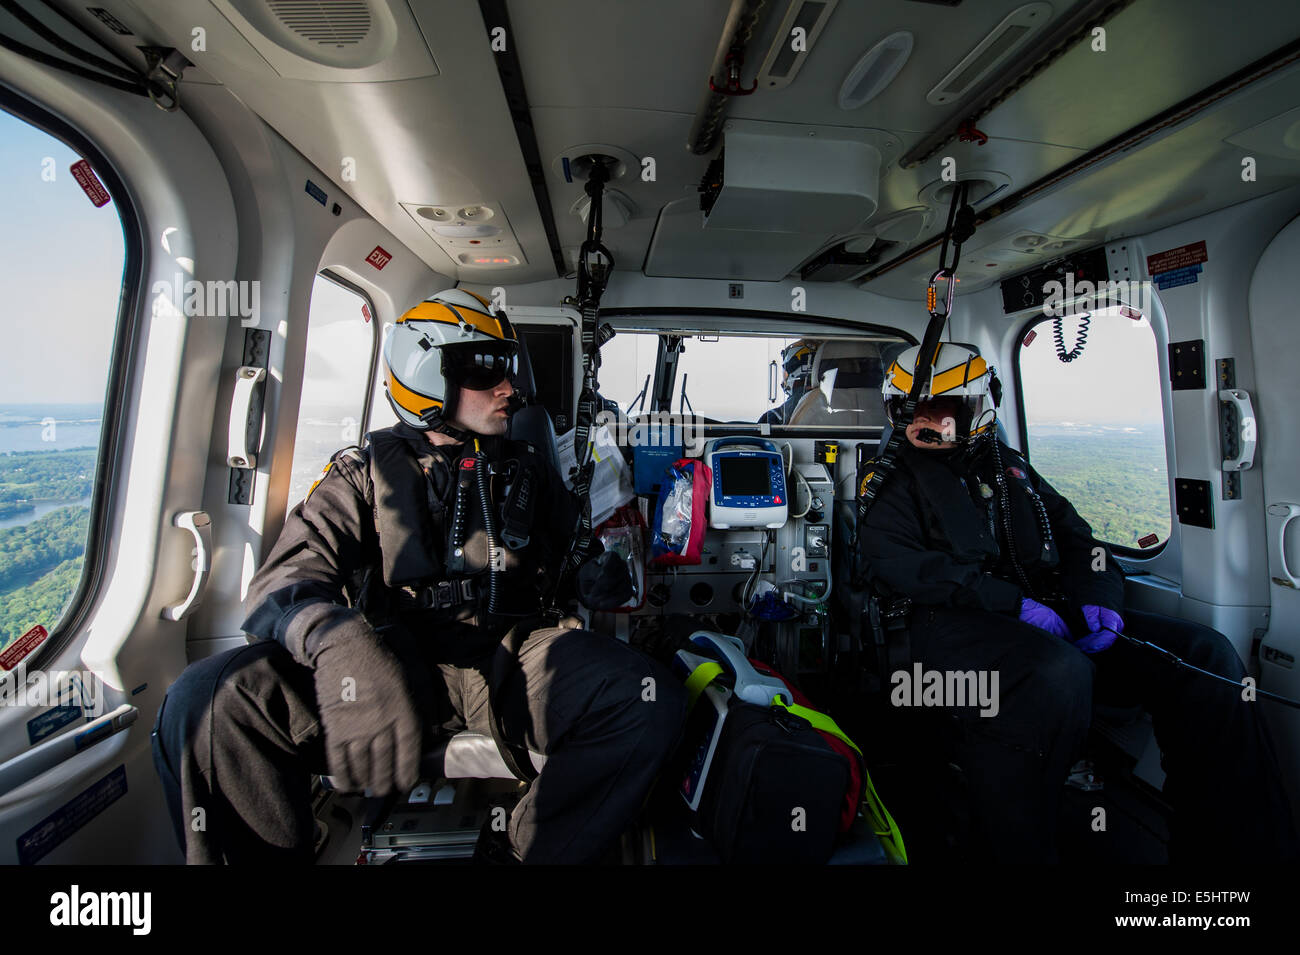 Maryland State police flight medics, Corporal Mattingly, and trooper Michael McCloskey, speak to medics on the ground and hospi Stock Photo